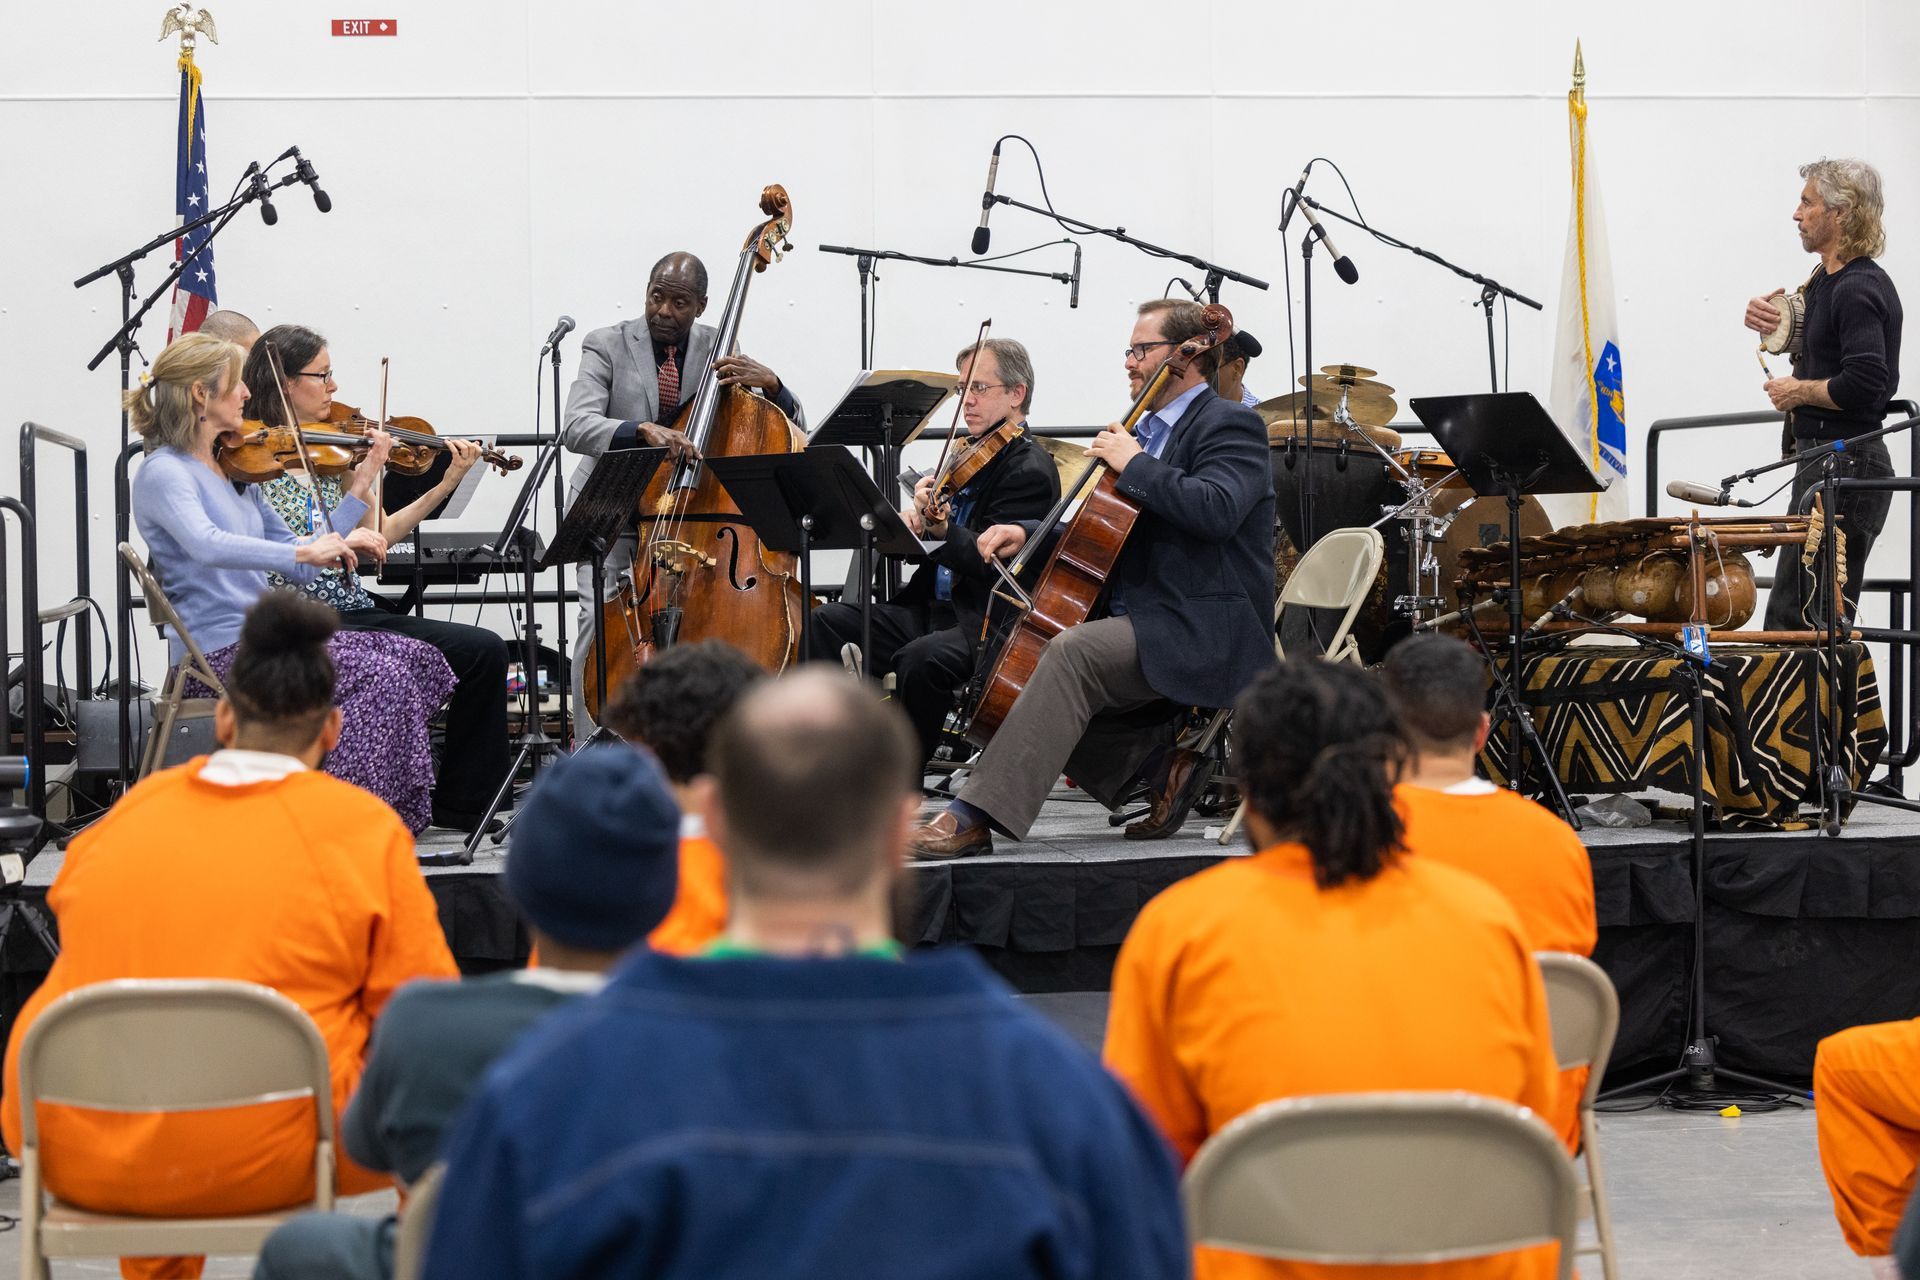 Jazz musician Avery Sharpe and the band perform a special concert at the Hampden County Correctional Center on Friday, Apr. 21, 2023. (Hoang 'Leon' Nguyen / The Republican)